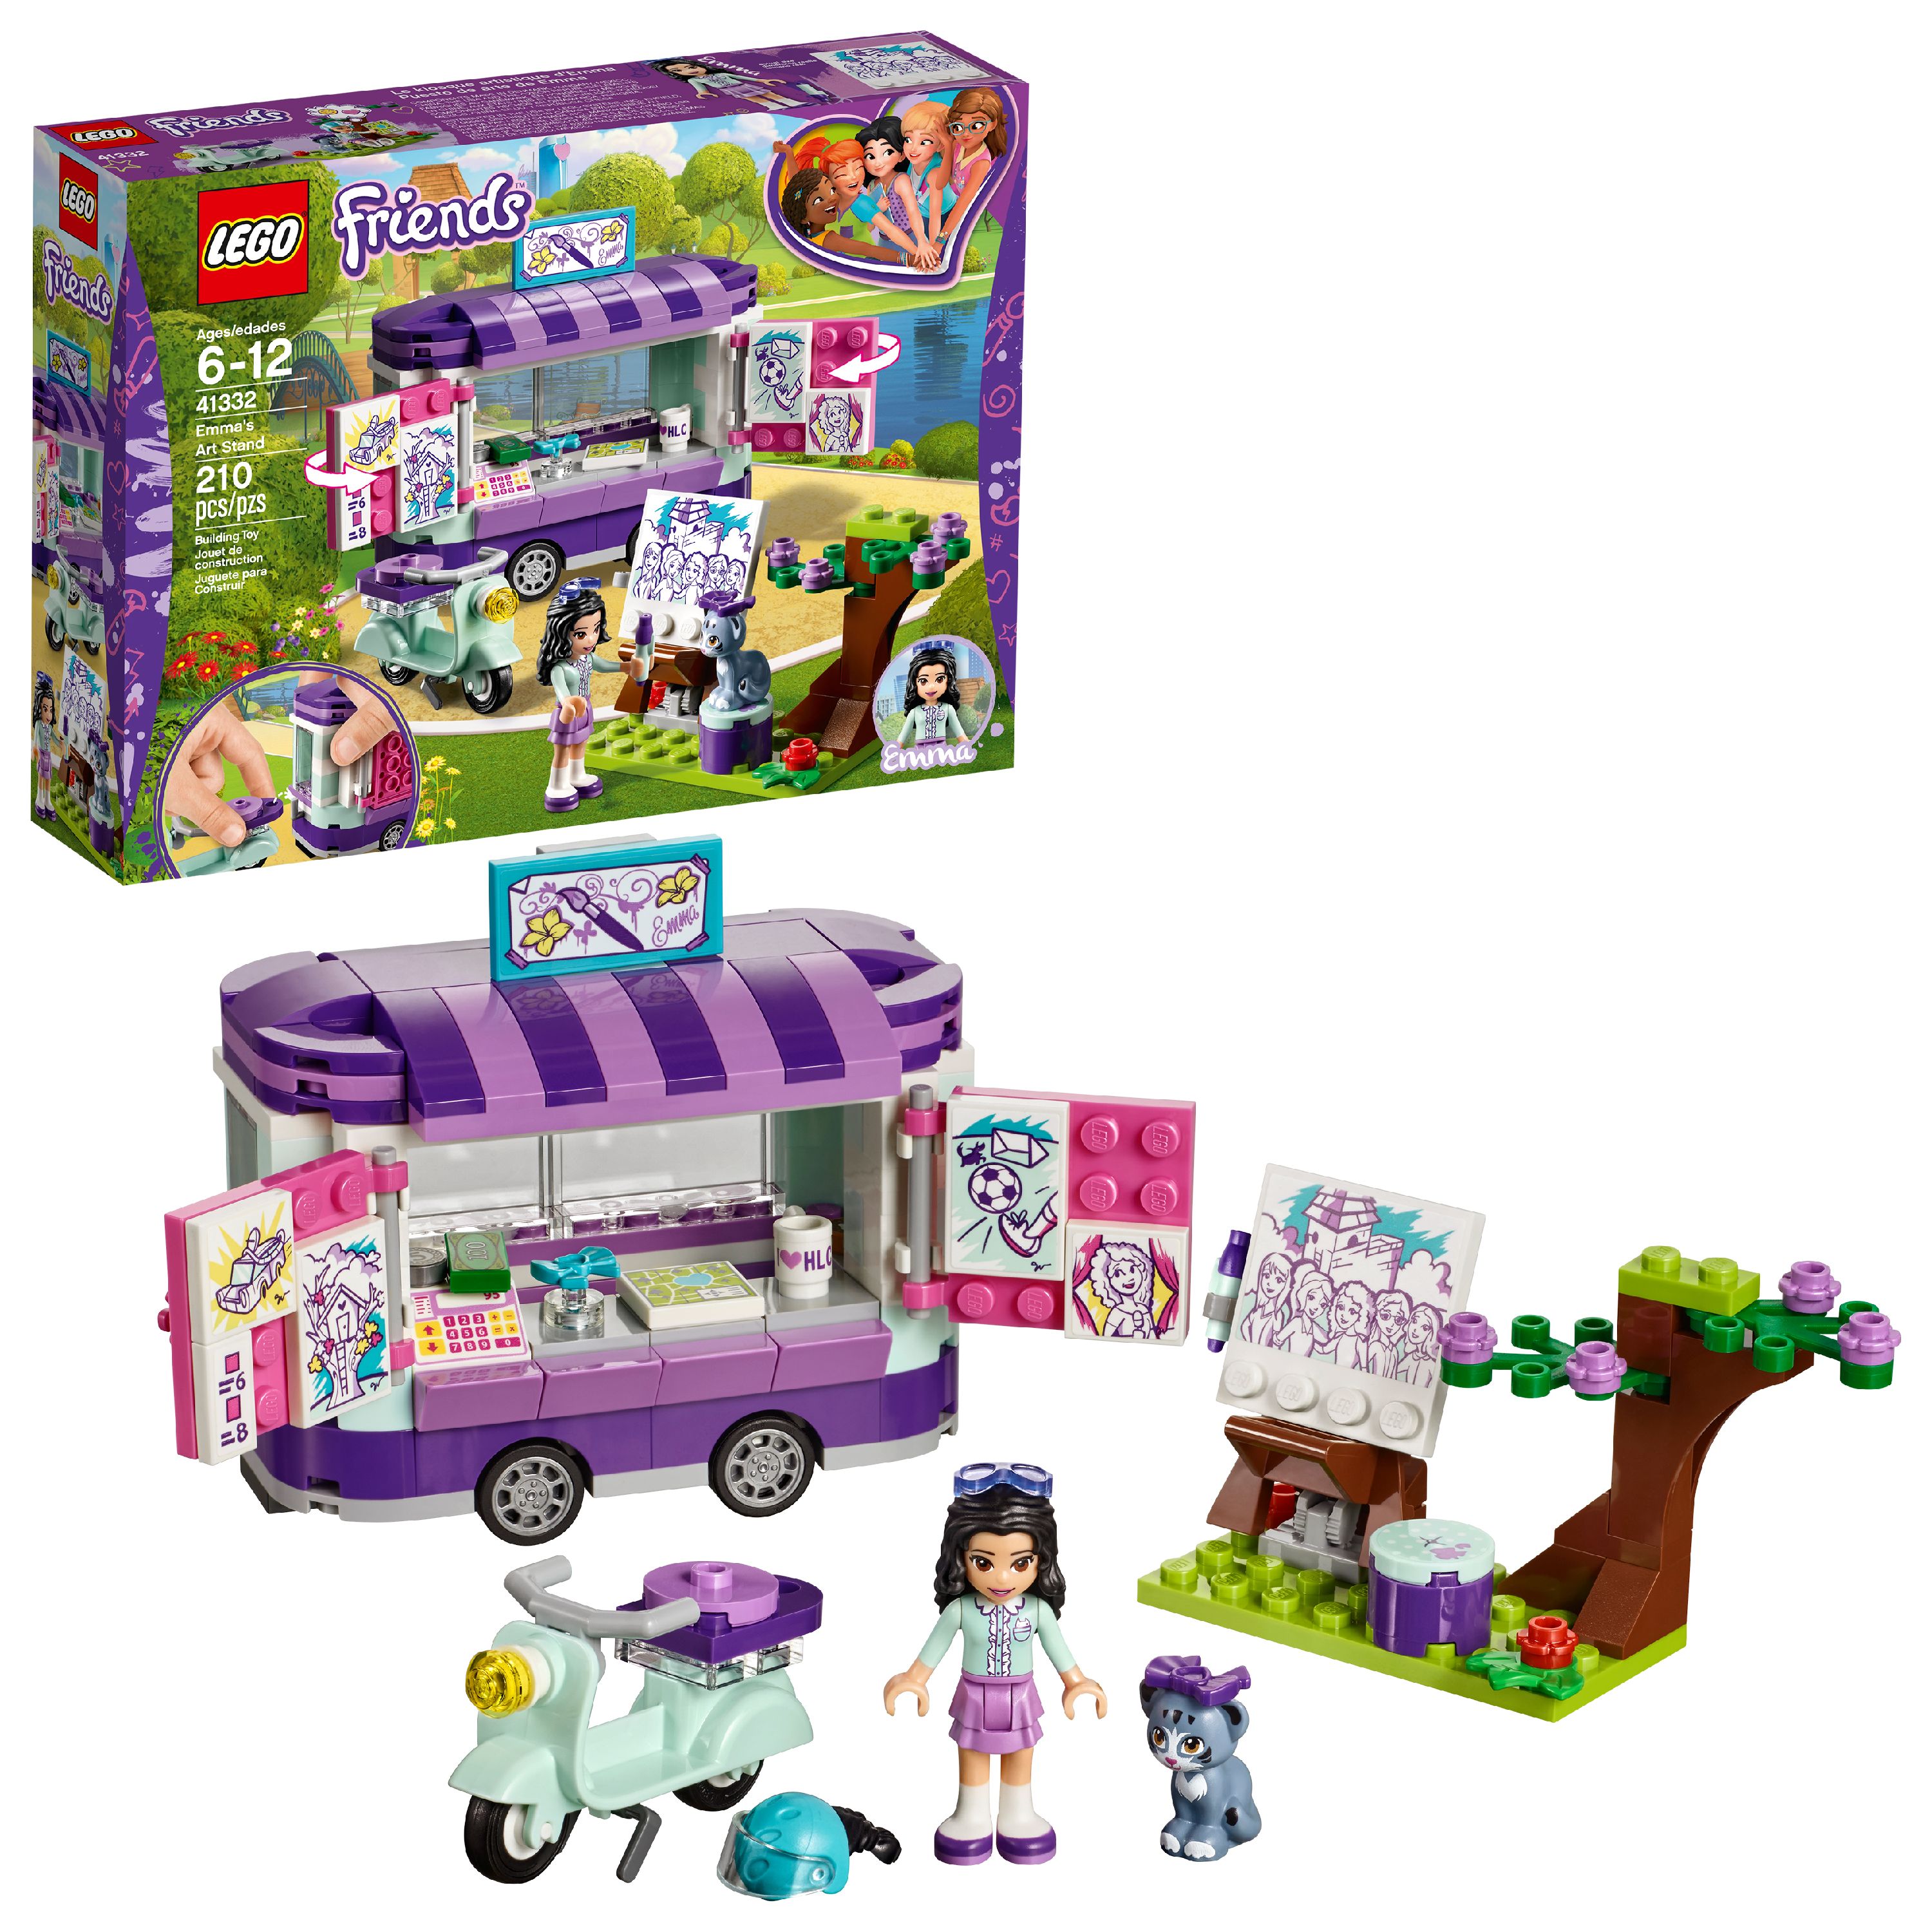 LEGO Friends Emma's Art Stand 41332 - image 1 of 7